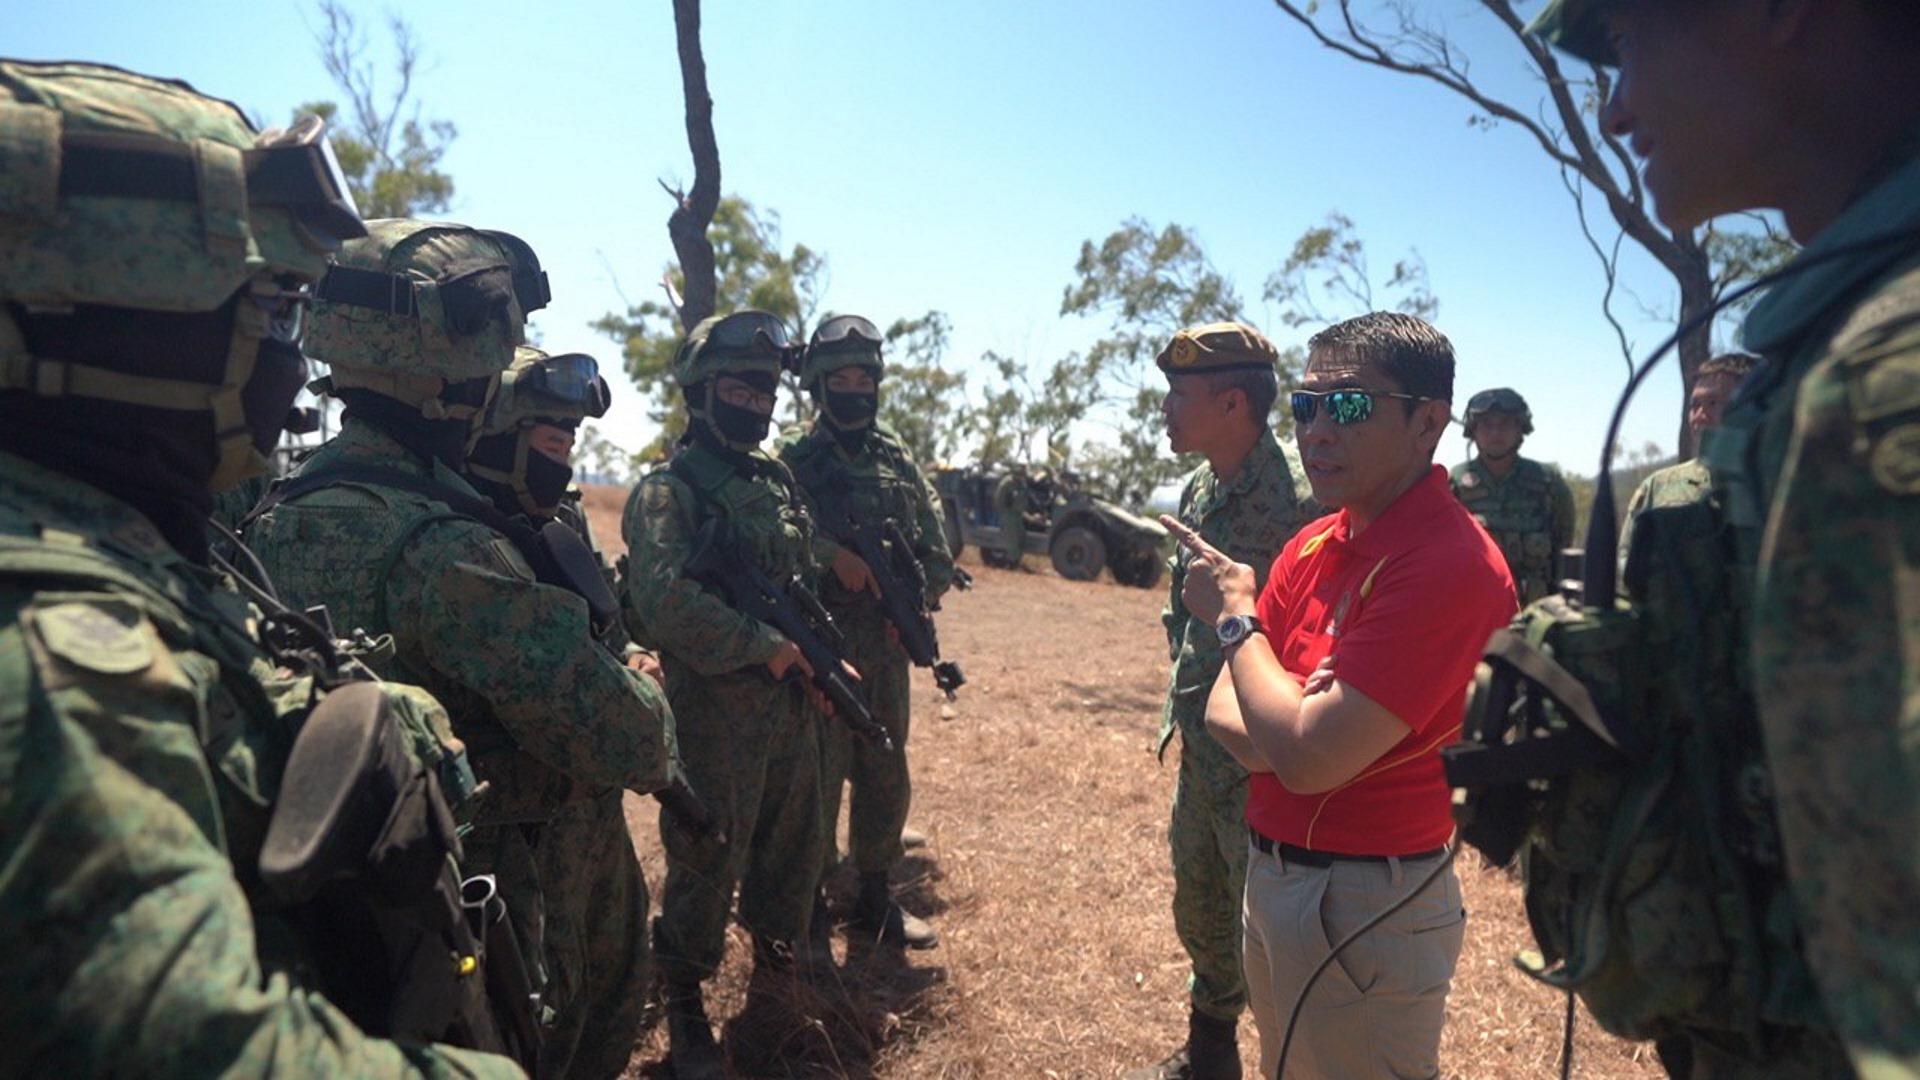 Dr Maliki interacting with Army personnel participating in Exercise Wallaby 2019.